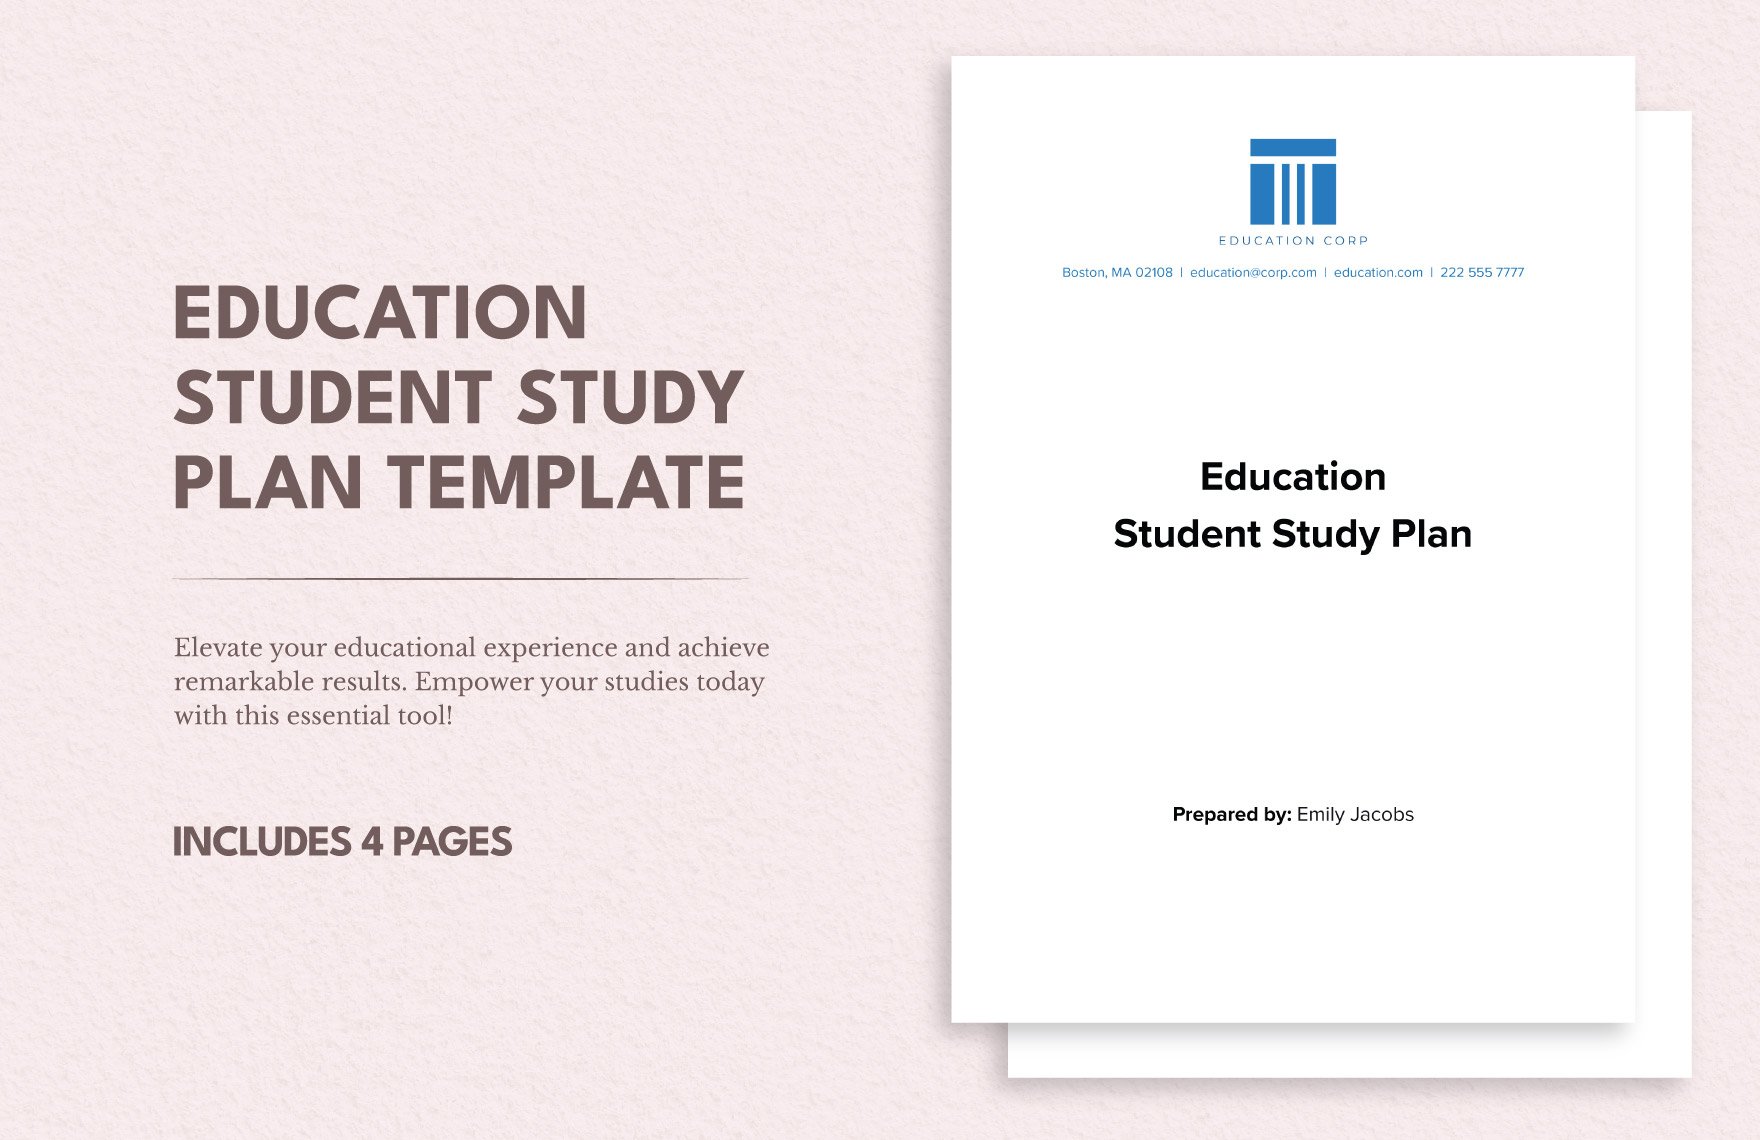 Education Student Study Plan Template